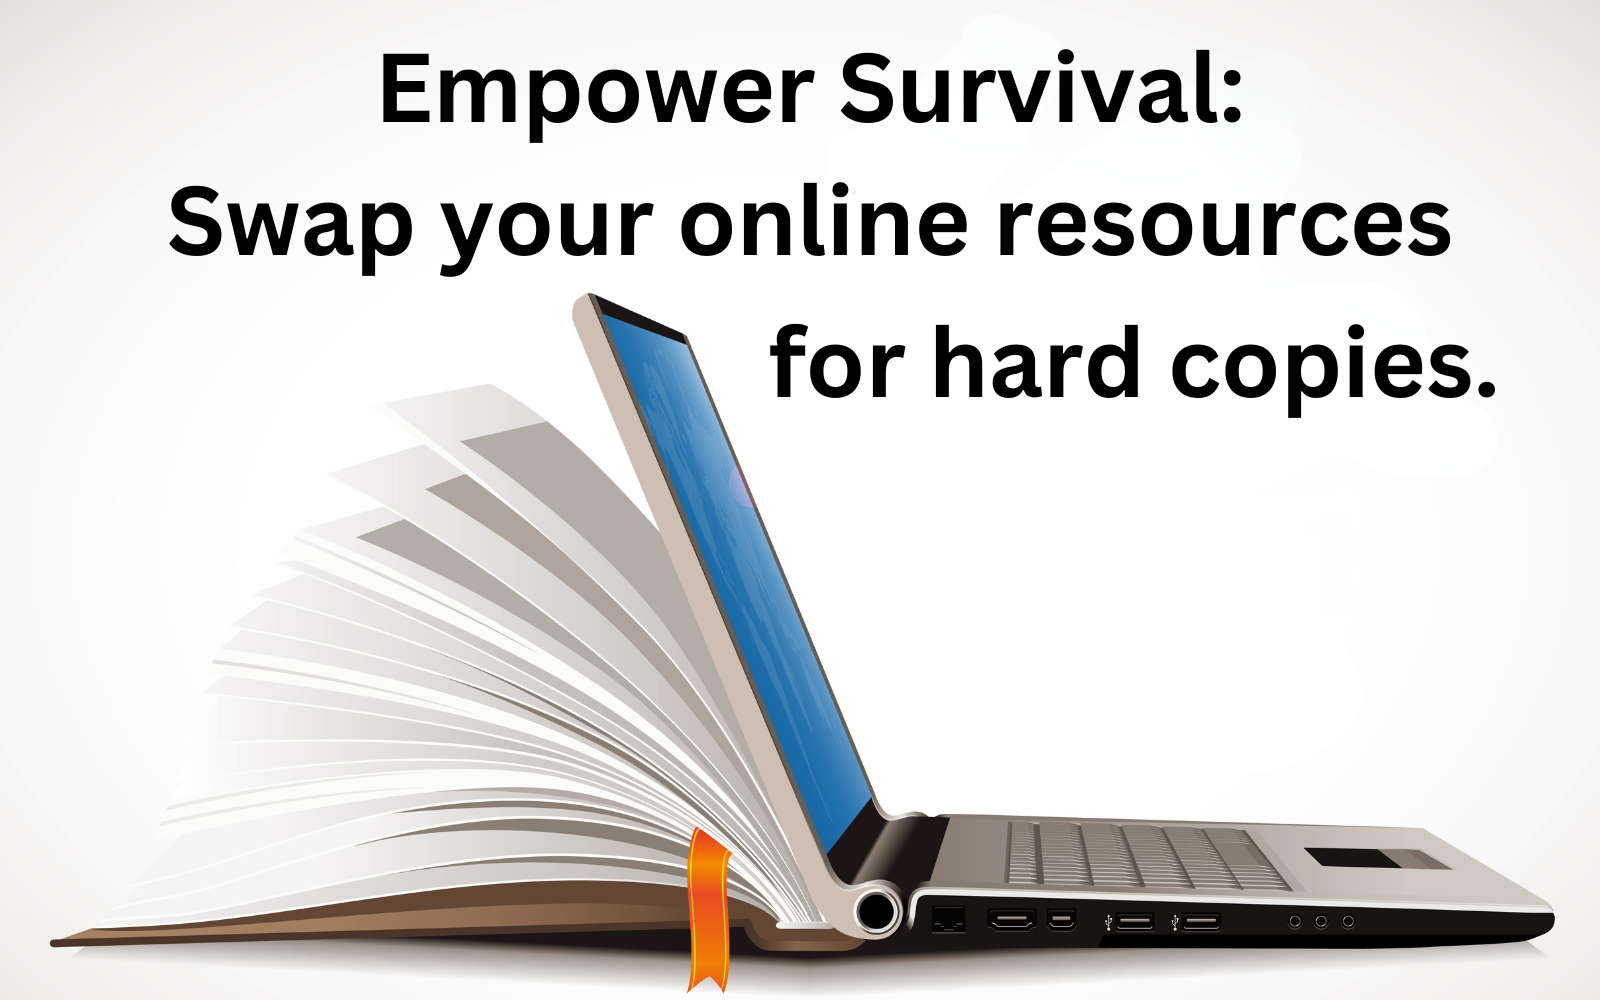 Empower Survival: Swap your online resources for hard copies.